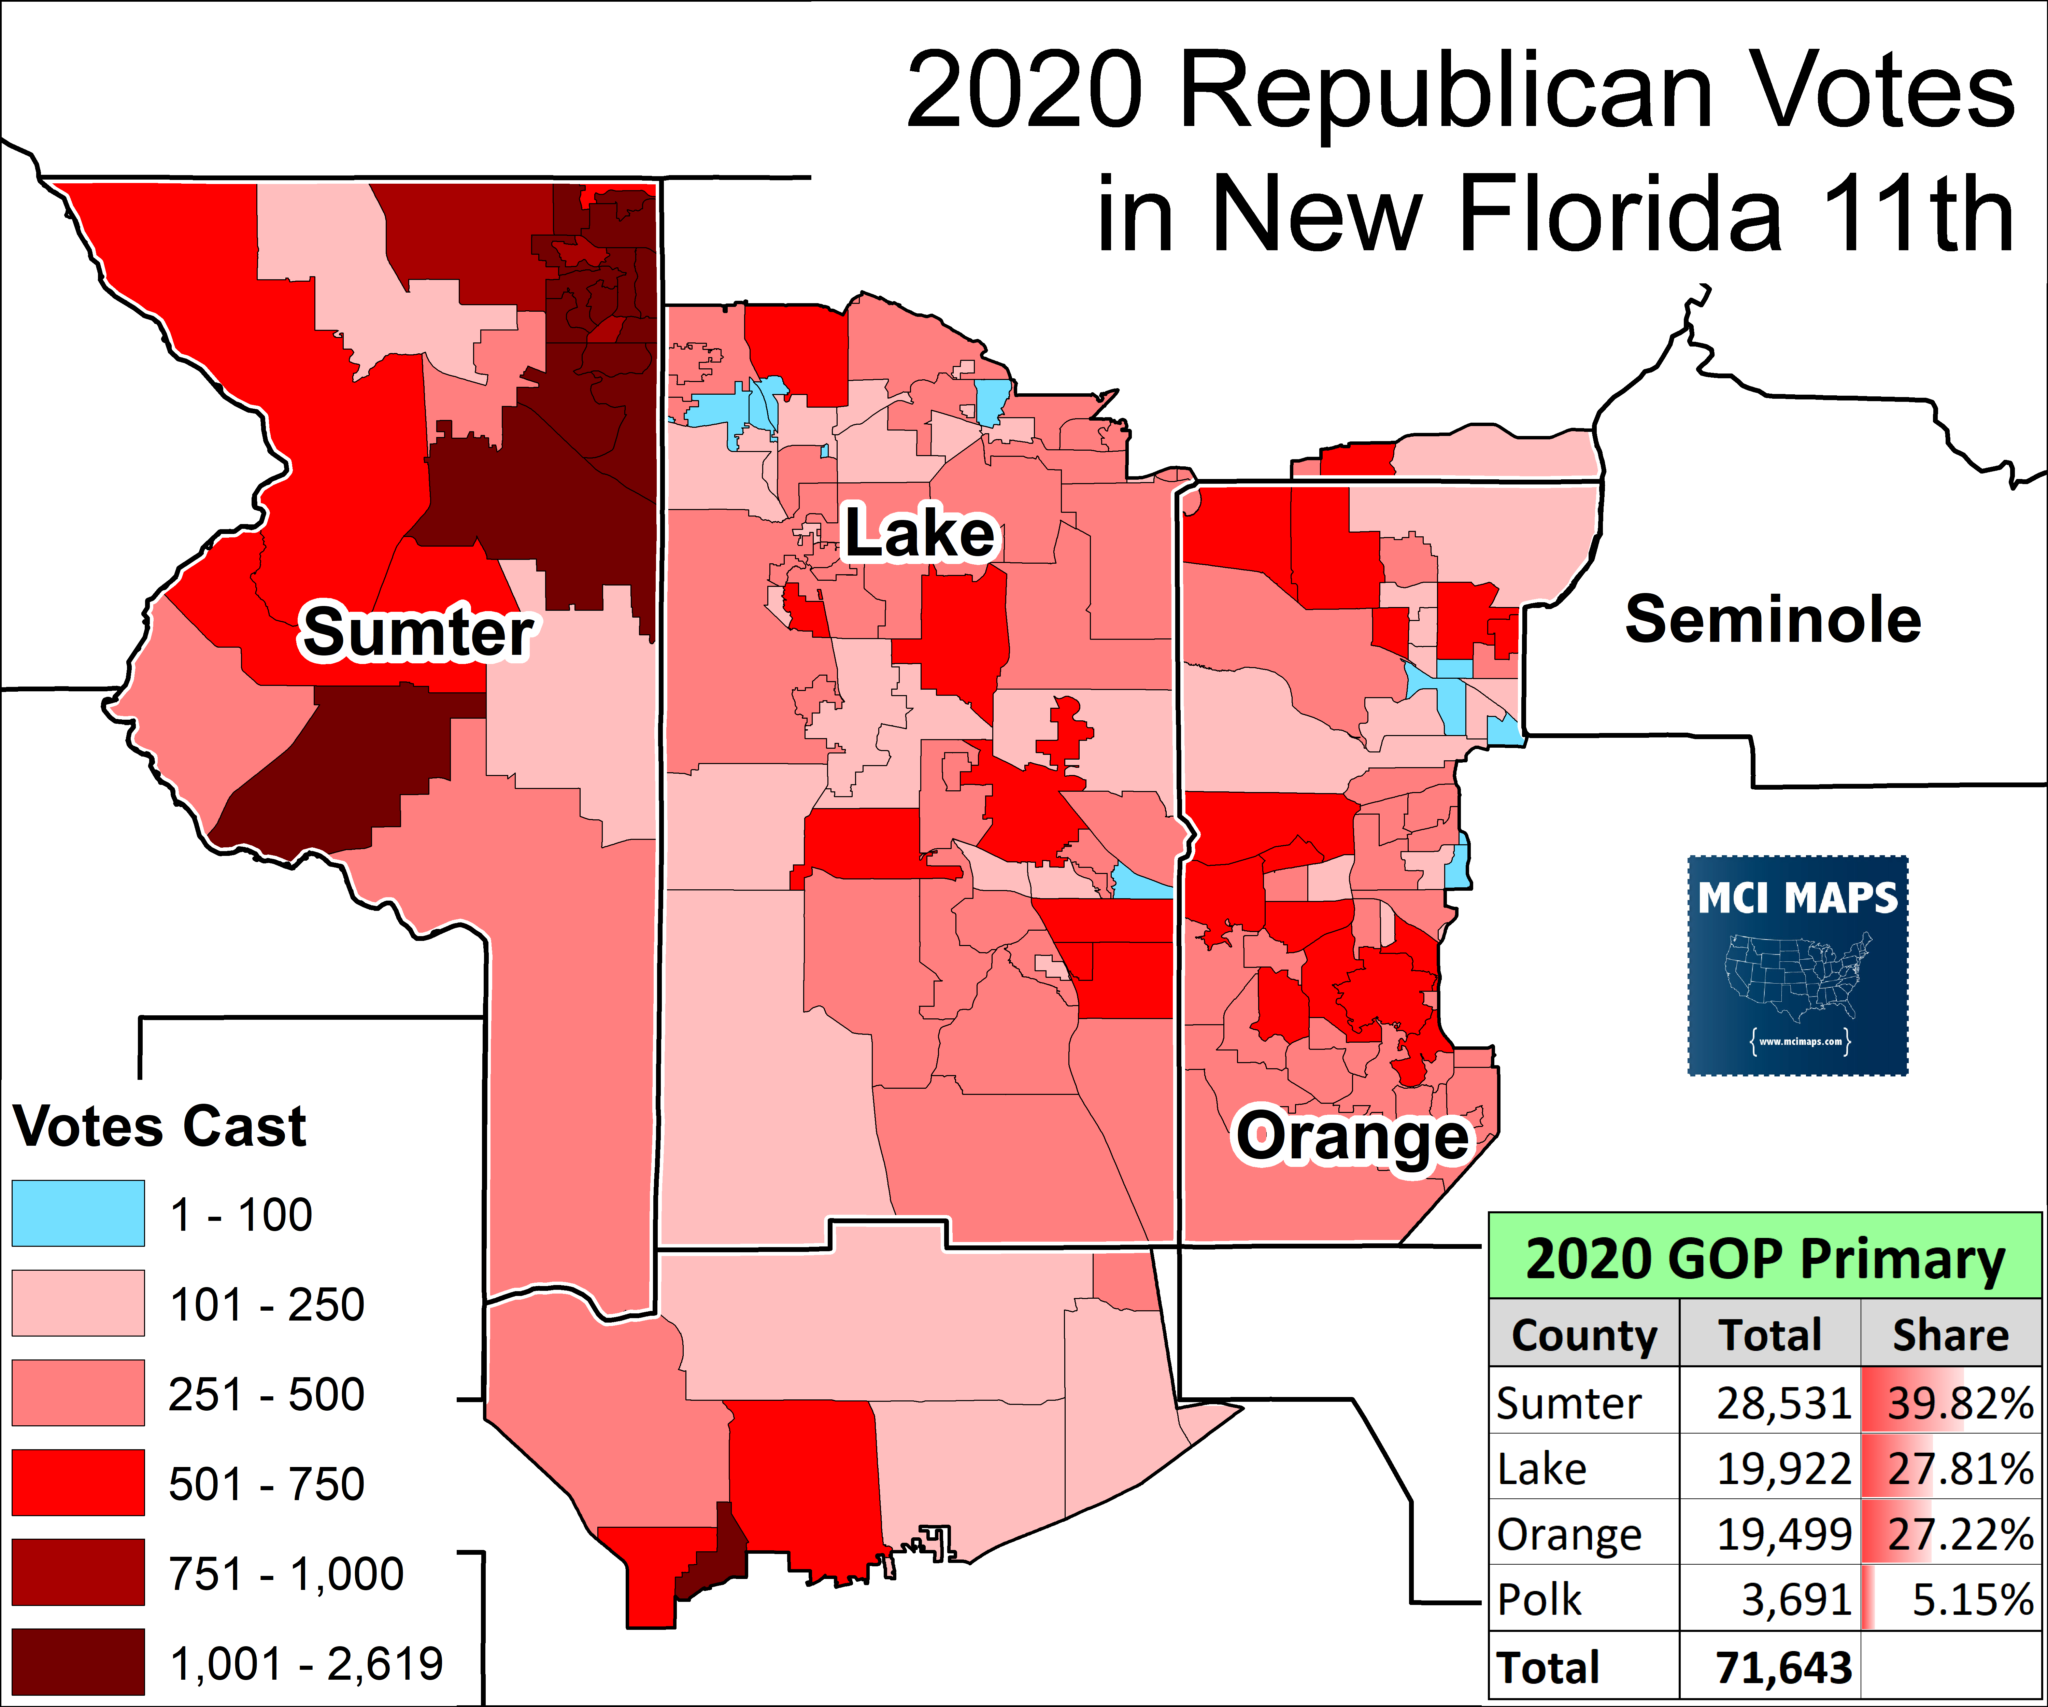 My 2022 Florida Primary Preview (Part 1) MCI Maps Election Data